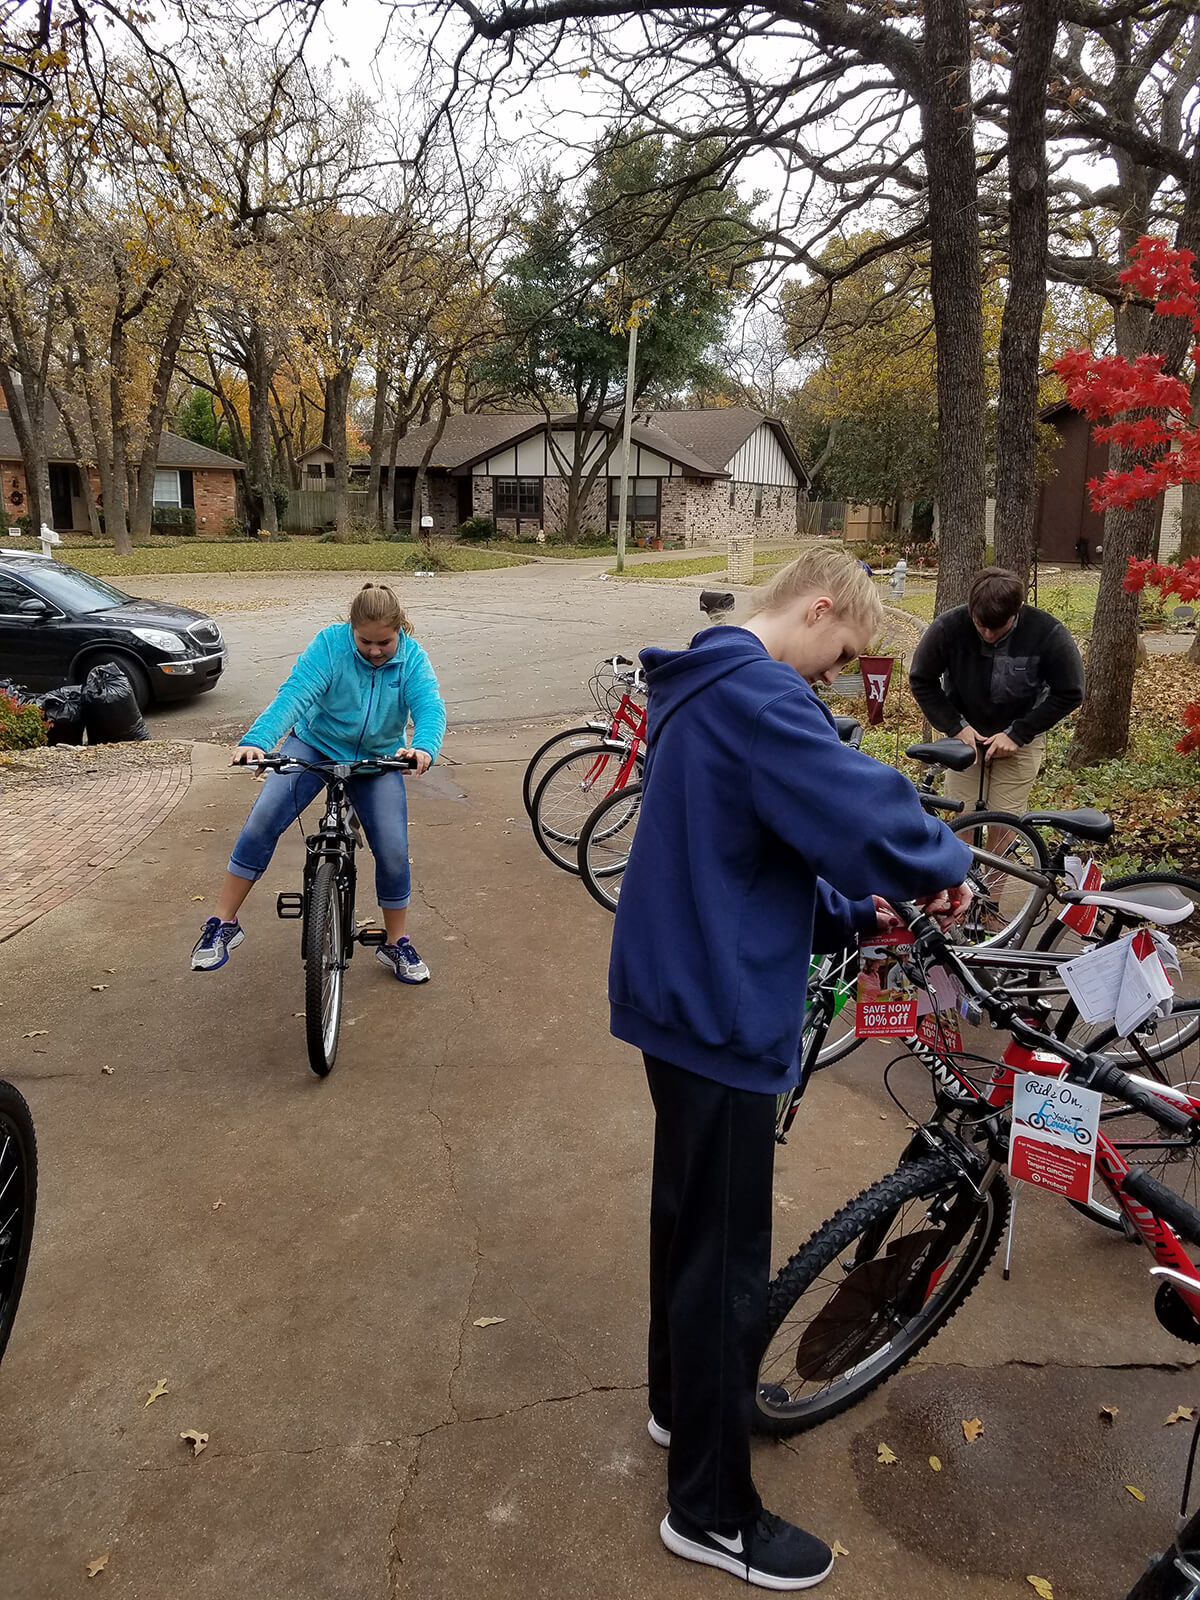 WheelBrothers give back to their community